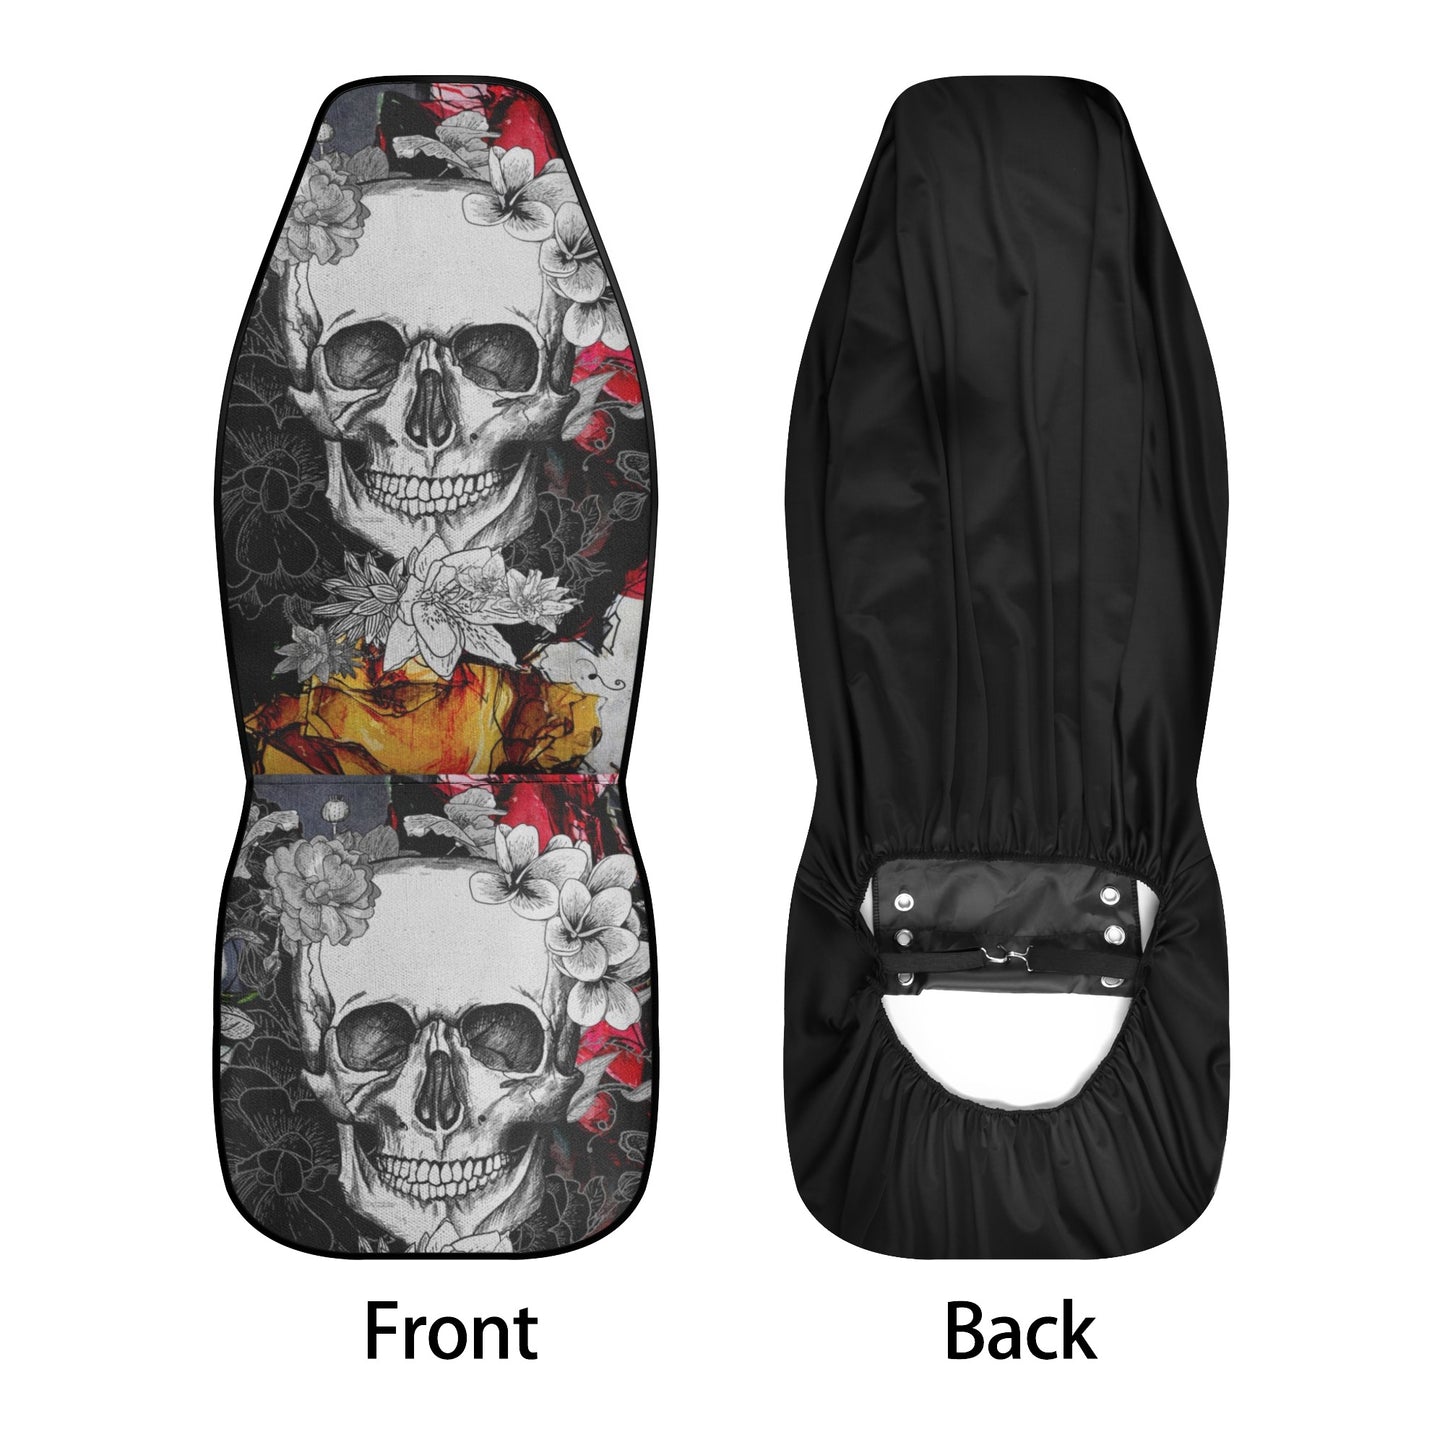 Flaming skull car seat protector cover, skull seat cover for vehicles, grim reaper car seat cushion cover, halloween truck seat cover, grim